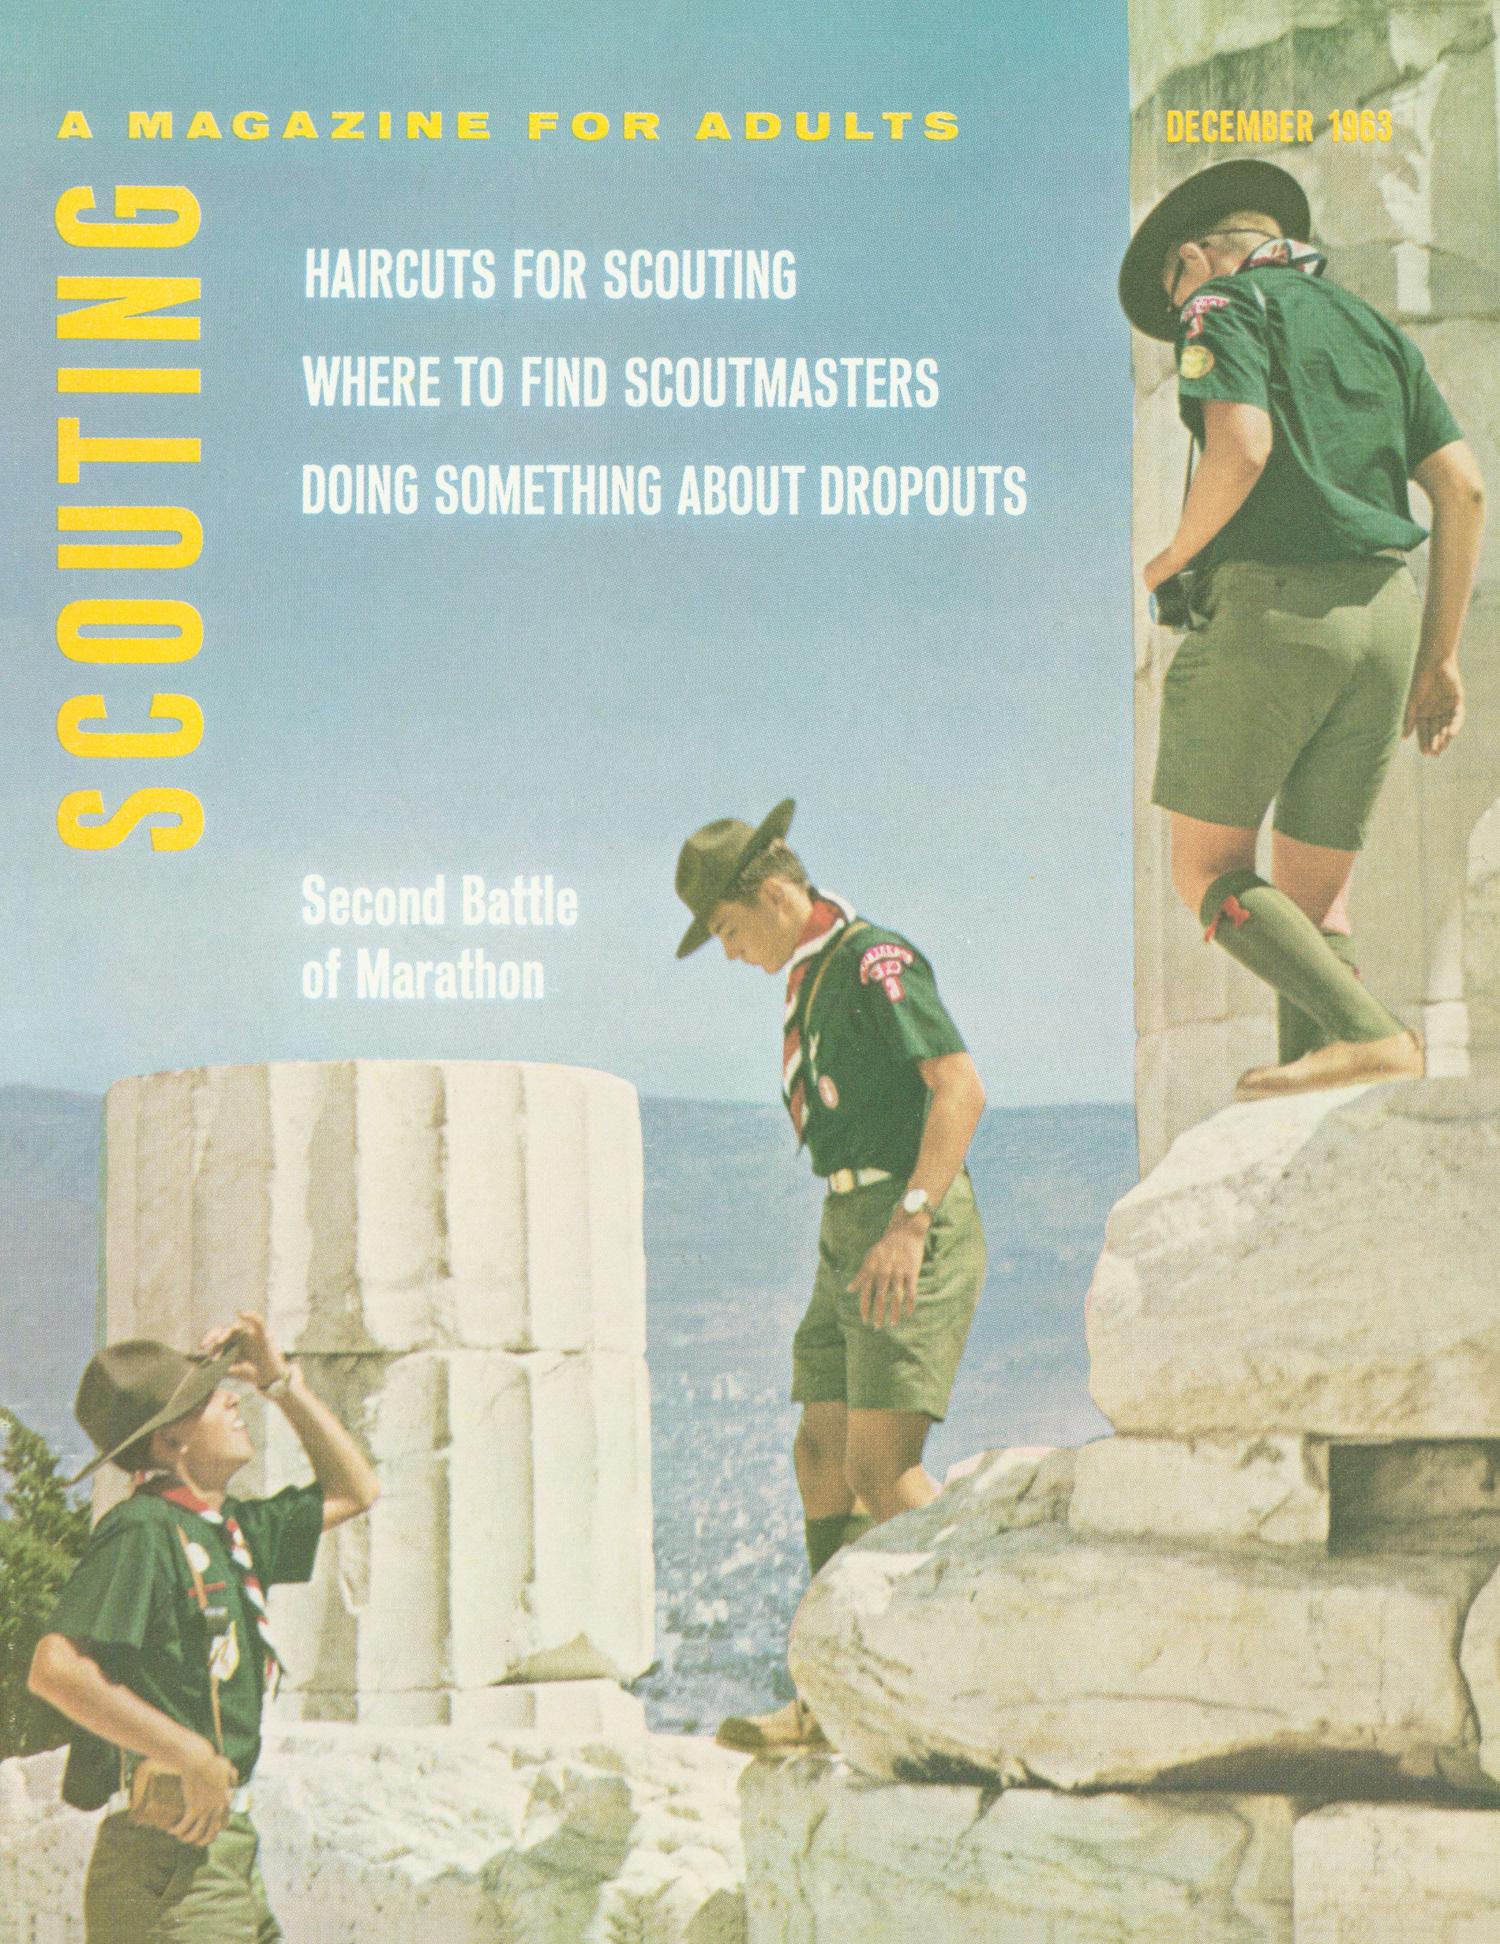 Scouting, Volume 51, Number 10, December 1963
                                                
                                                    Front Cover
                                                